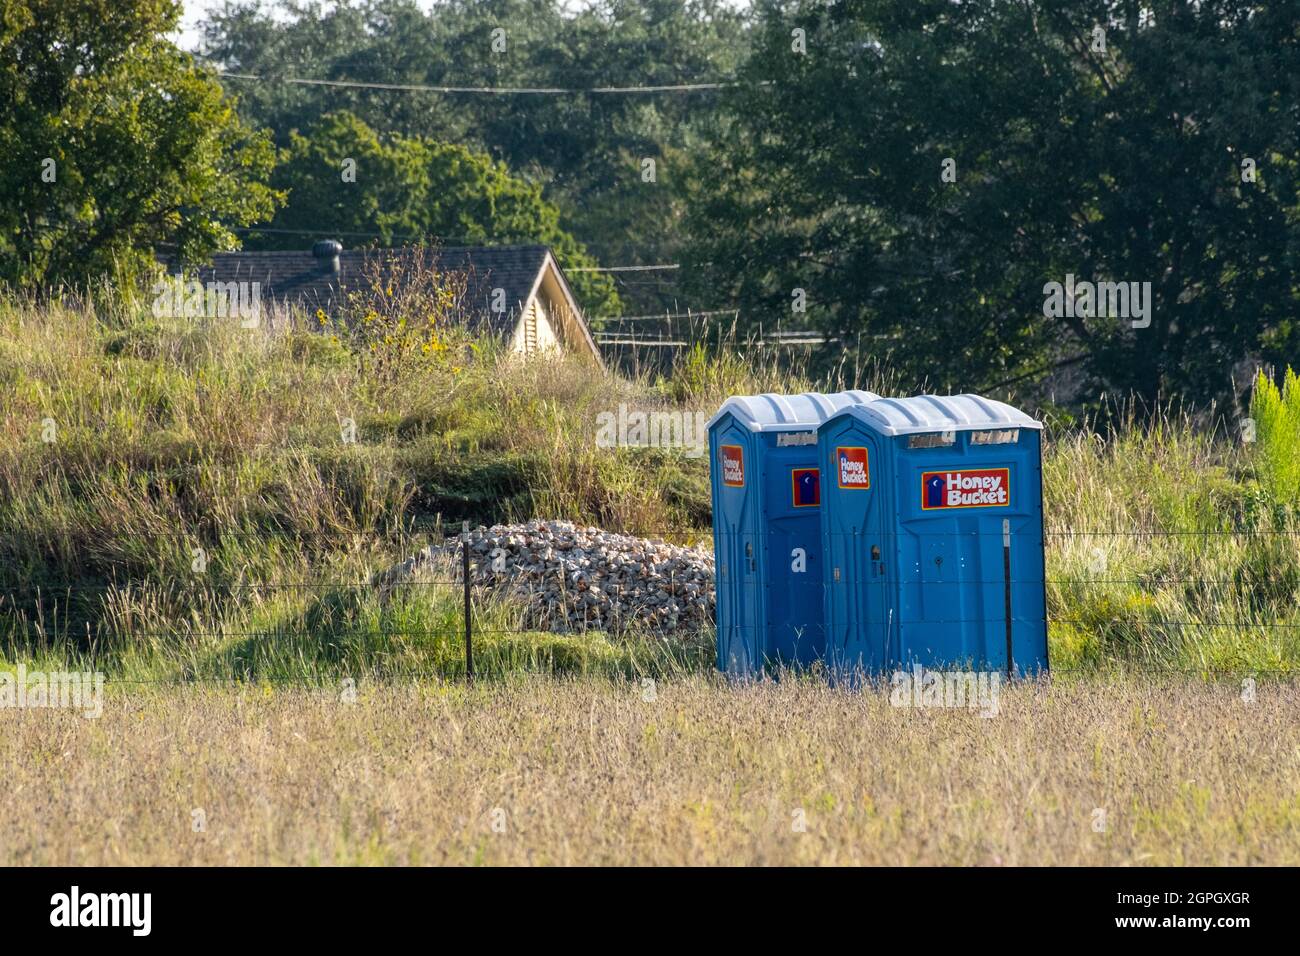 Two portable toilets' painted blue and commonly called porta-potties in US setting out in grassy field with house in background Stock Photo